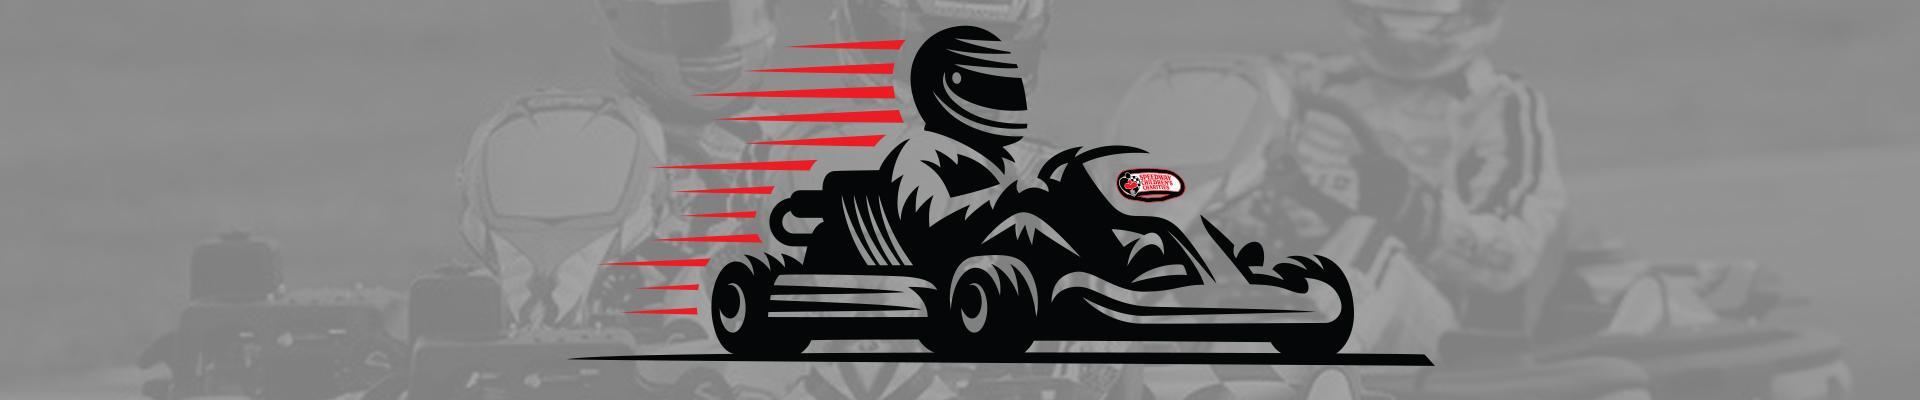 Karting for a Cause Header